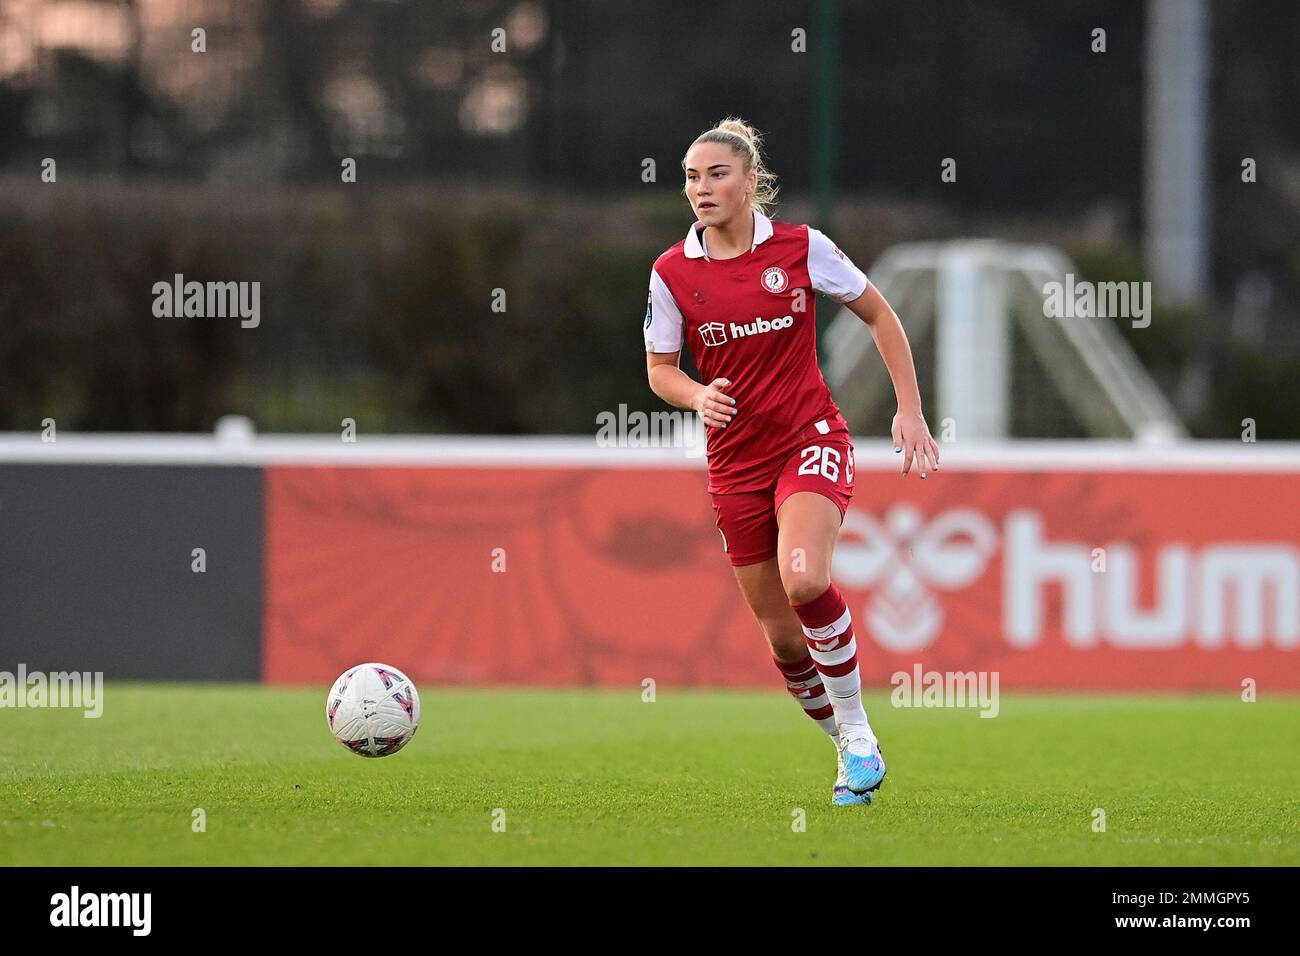 Bristol, UK. 29th January, 2023. Gracie Pearse of Bristol City Women  - Mandatory by-line: Ashley Crowden  - 29/01/2023 - FOOTBALL - Robins High Performance Centre - Bristol, England - Bristol City Women vs Oxford United Women - The Women's FA Cup - Fourth Round Credit: Ashley Crowden/Alamy Live News Stock Photo